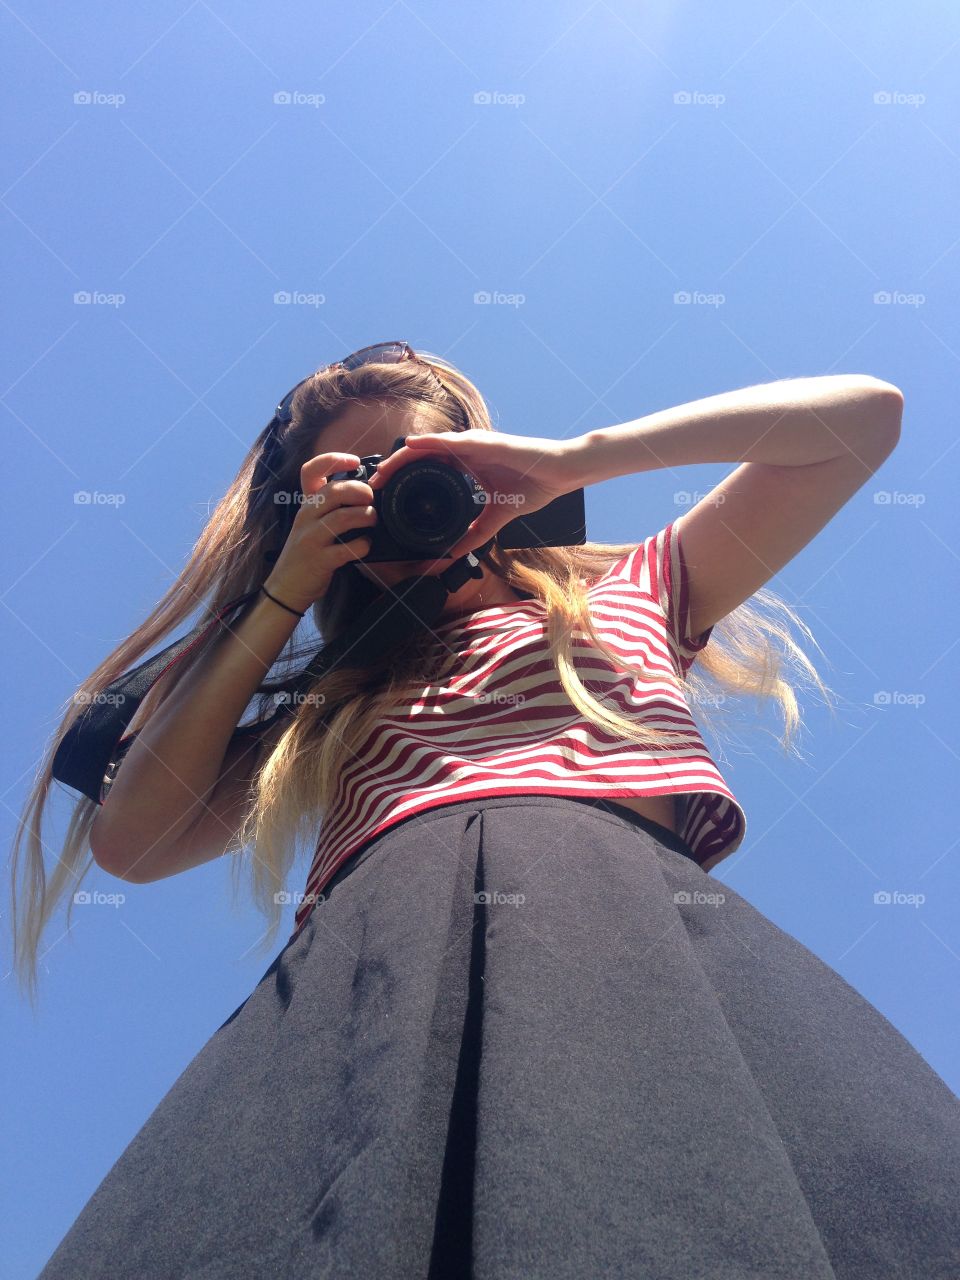 Low angle view of woman holding camera